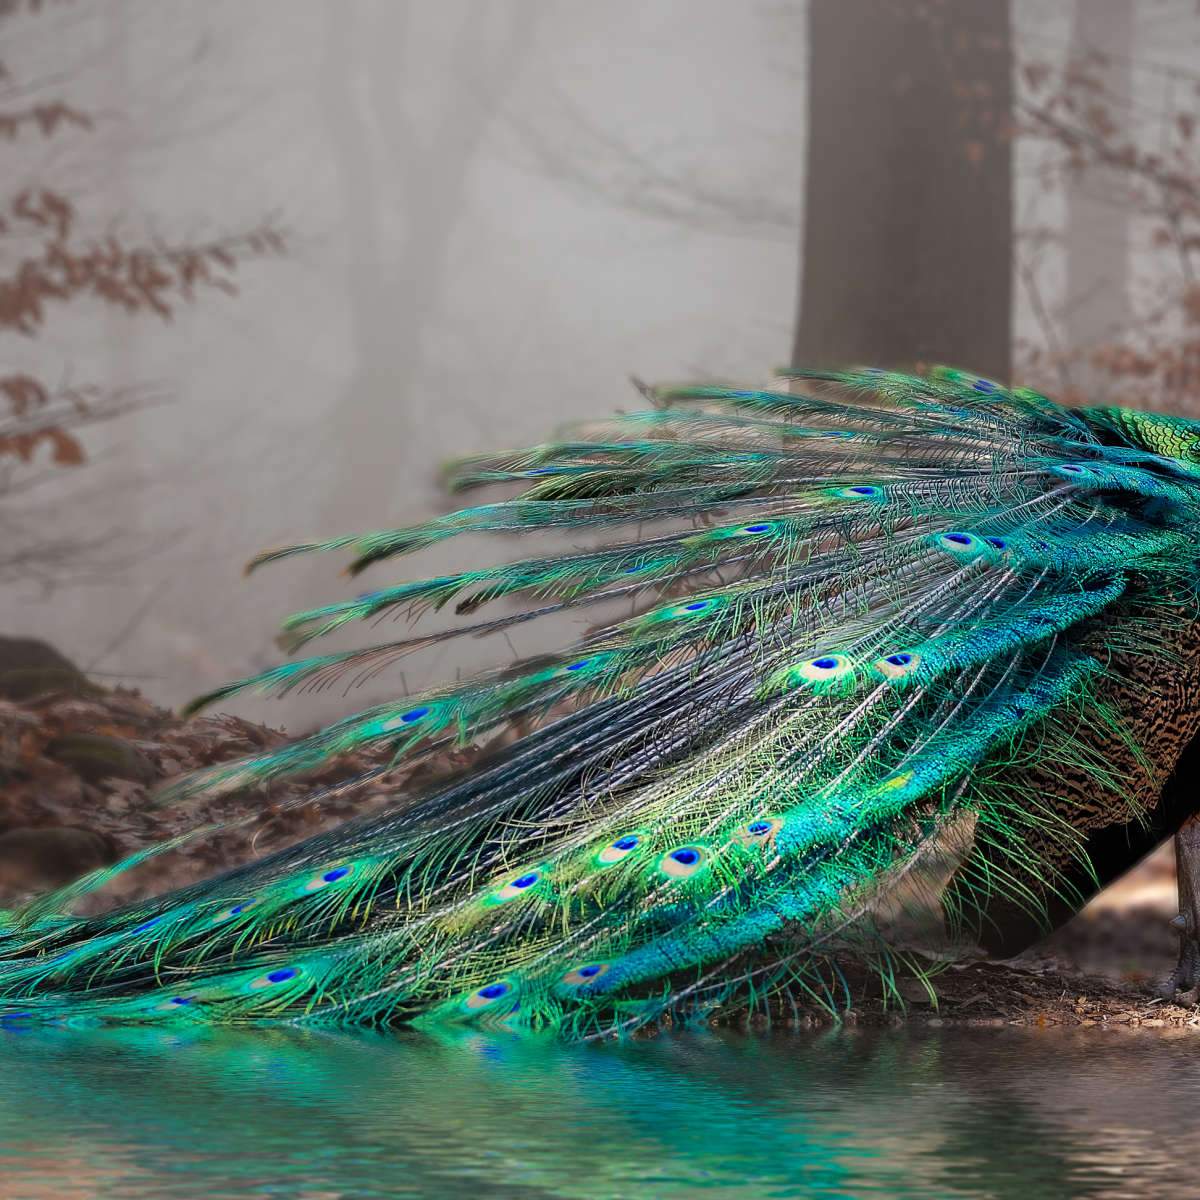 HD wallpaper: Peacock, feathers | Wallpaper Flare